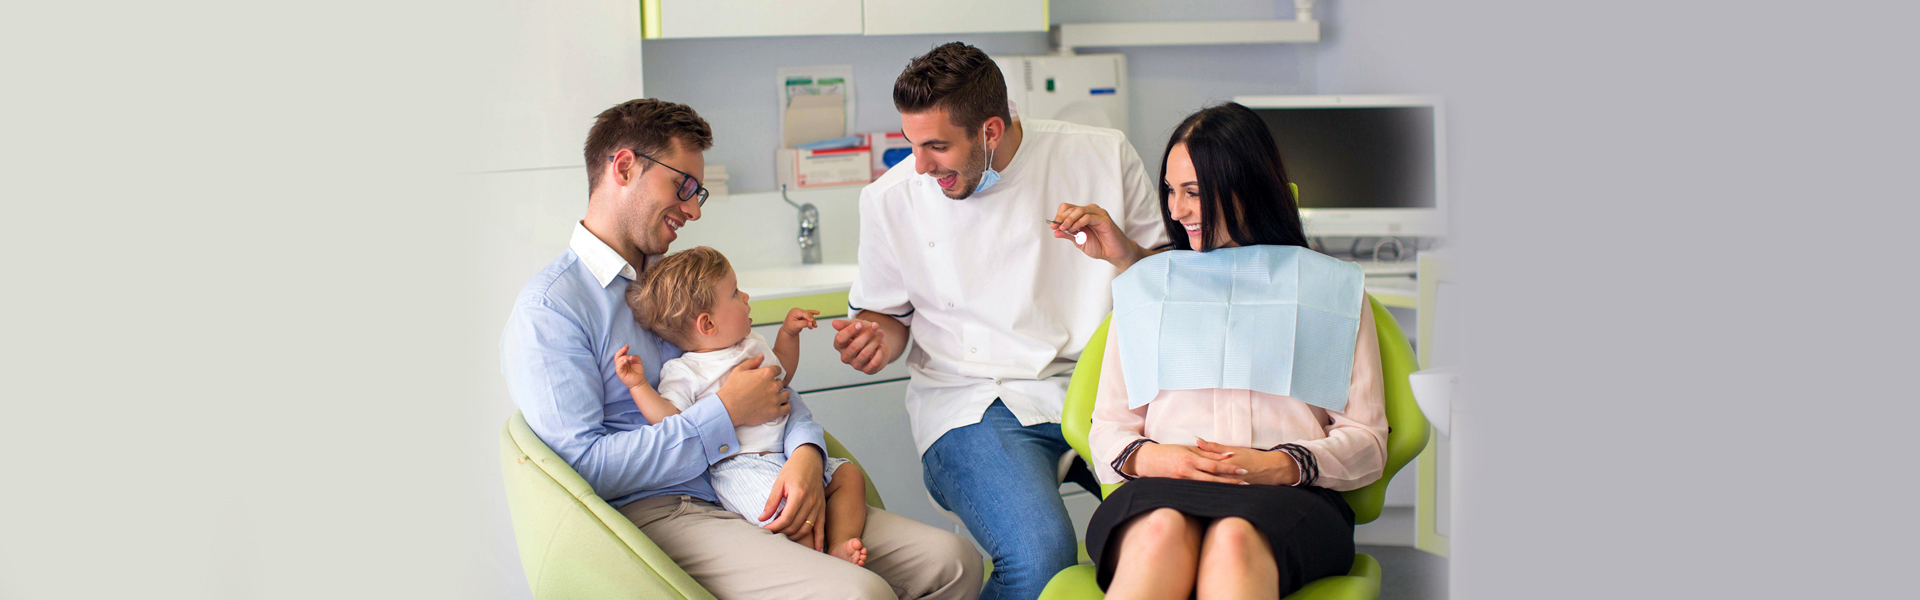 General Or Pediatric Dentistry? Read This To Make The Right Decision For Your Kids